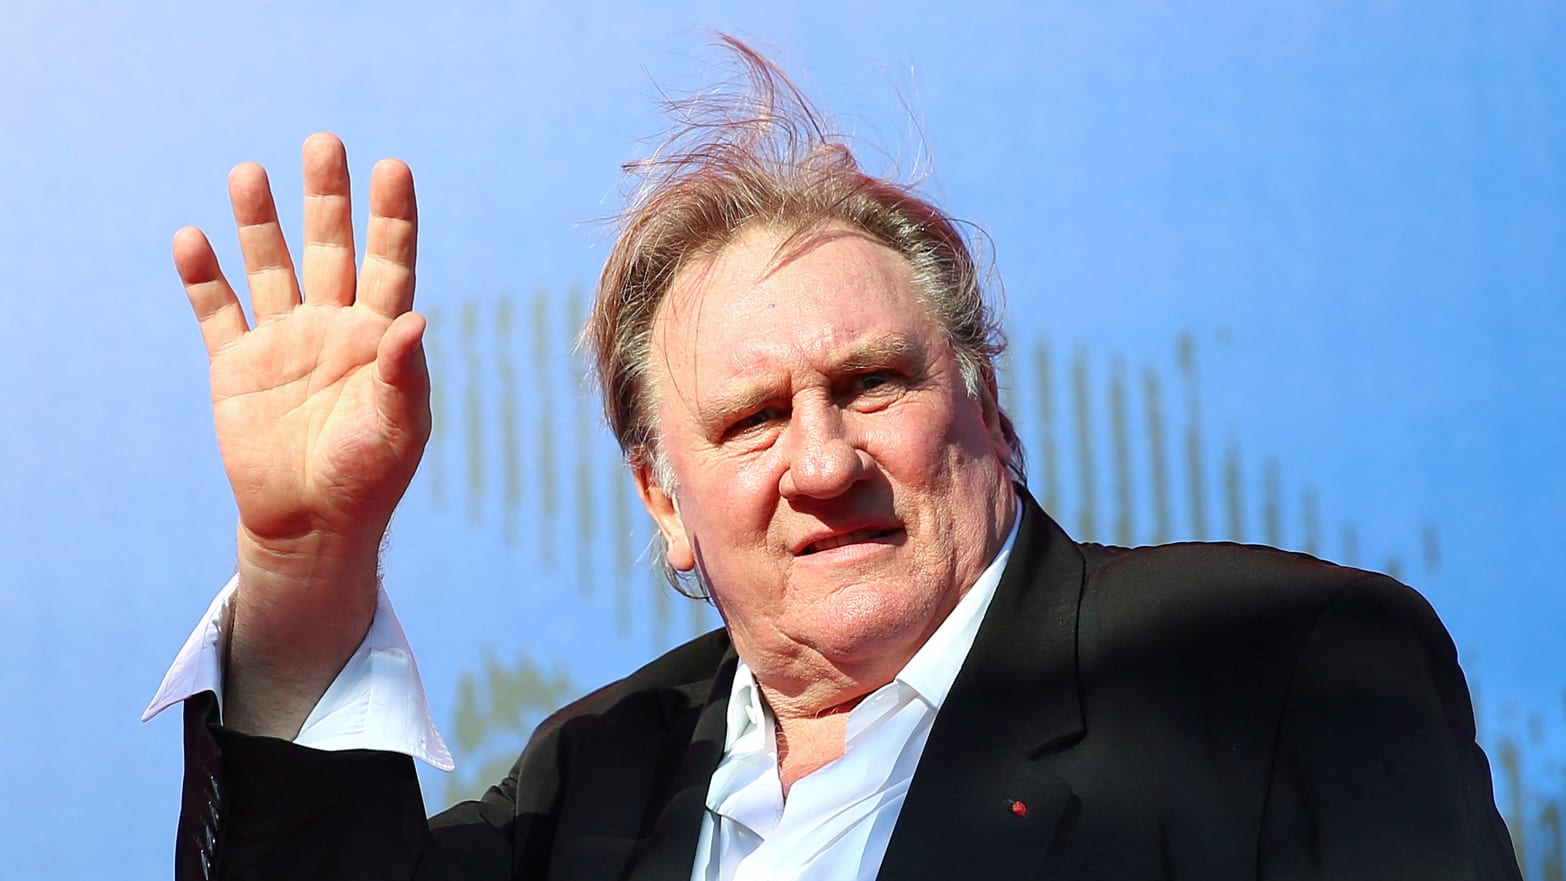 Gérard Depardieu allegedly punched a Rino Barillari, the “king of paparazzi,” at a famous bar in Rome, Italy.